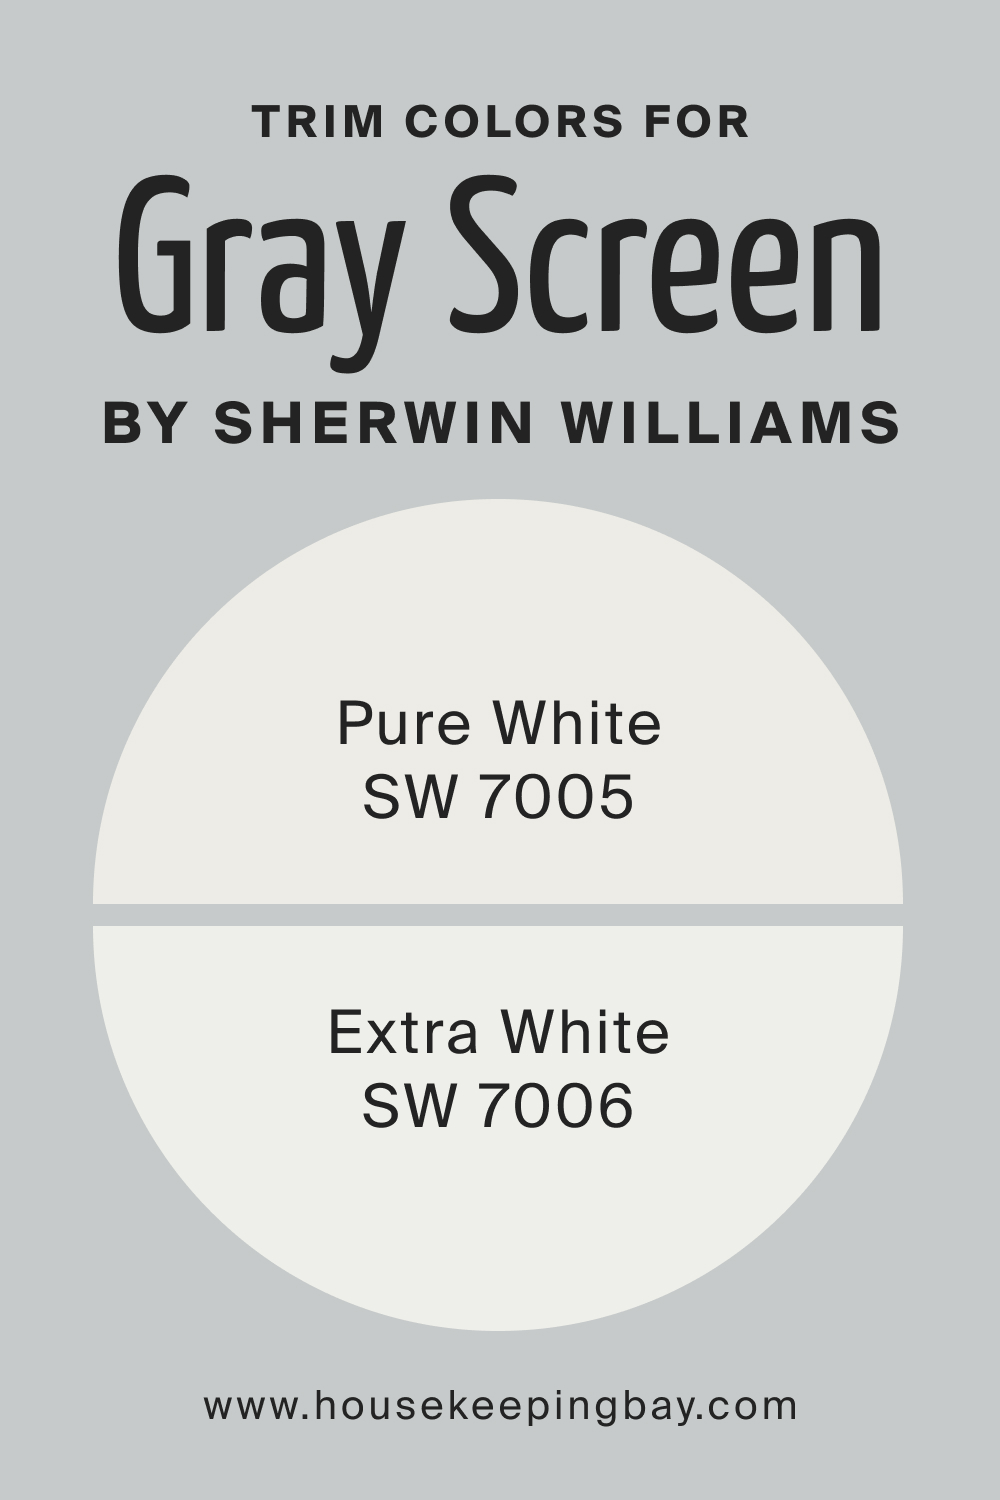 Trim Colors for SW Gray Screen by Sherwin Williams